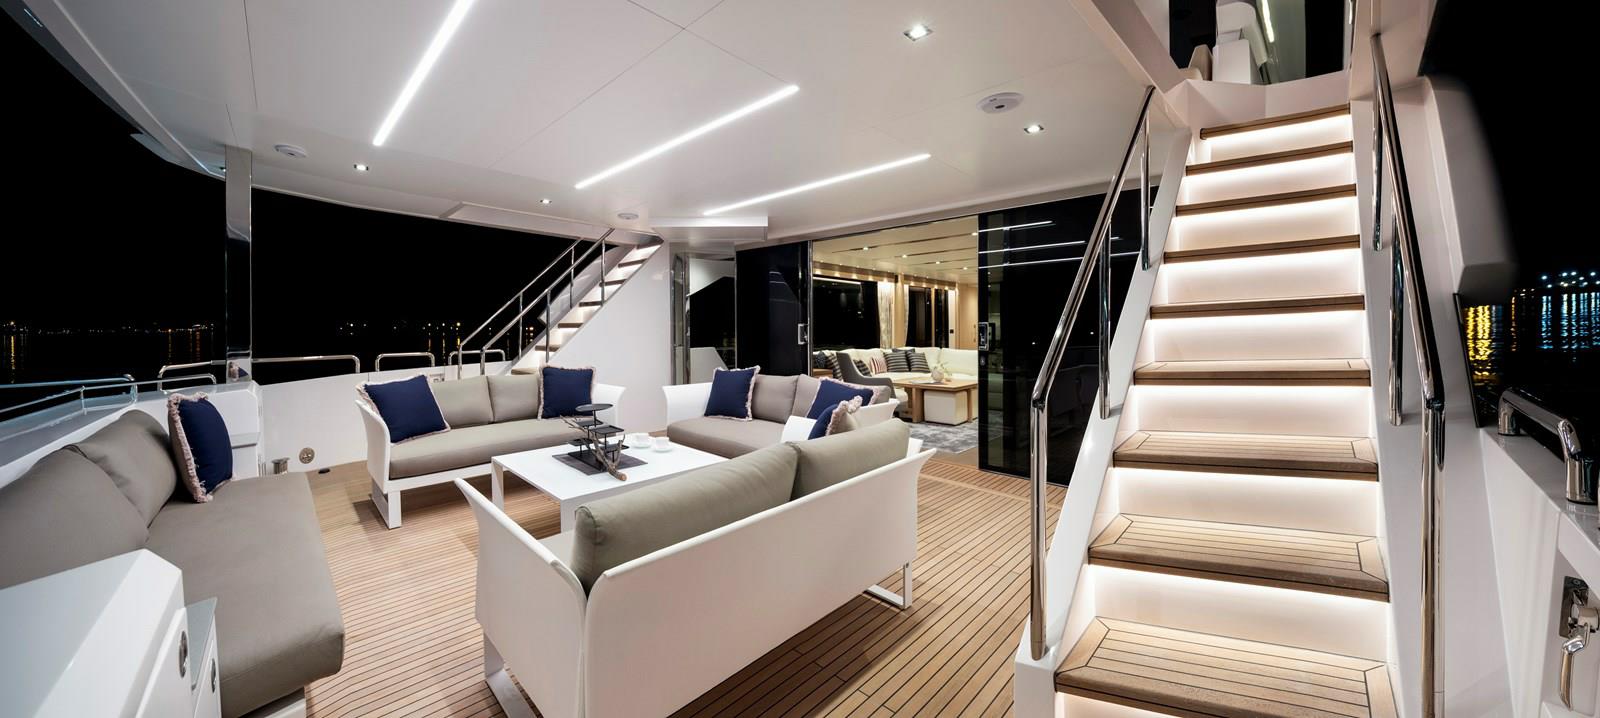 FD87 Aqua Life Aft Deck with four sofas, coffee table and staircases.